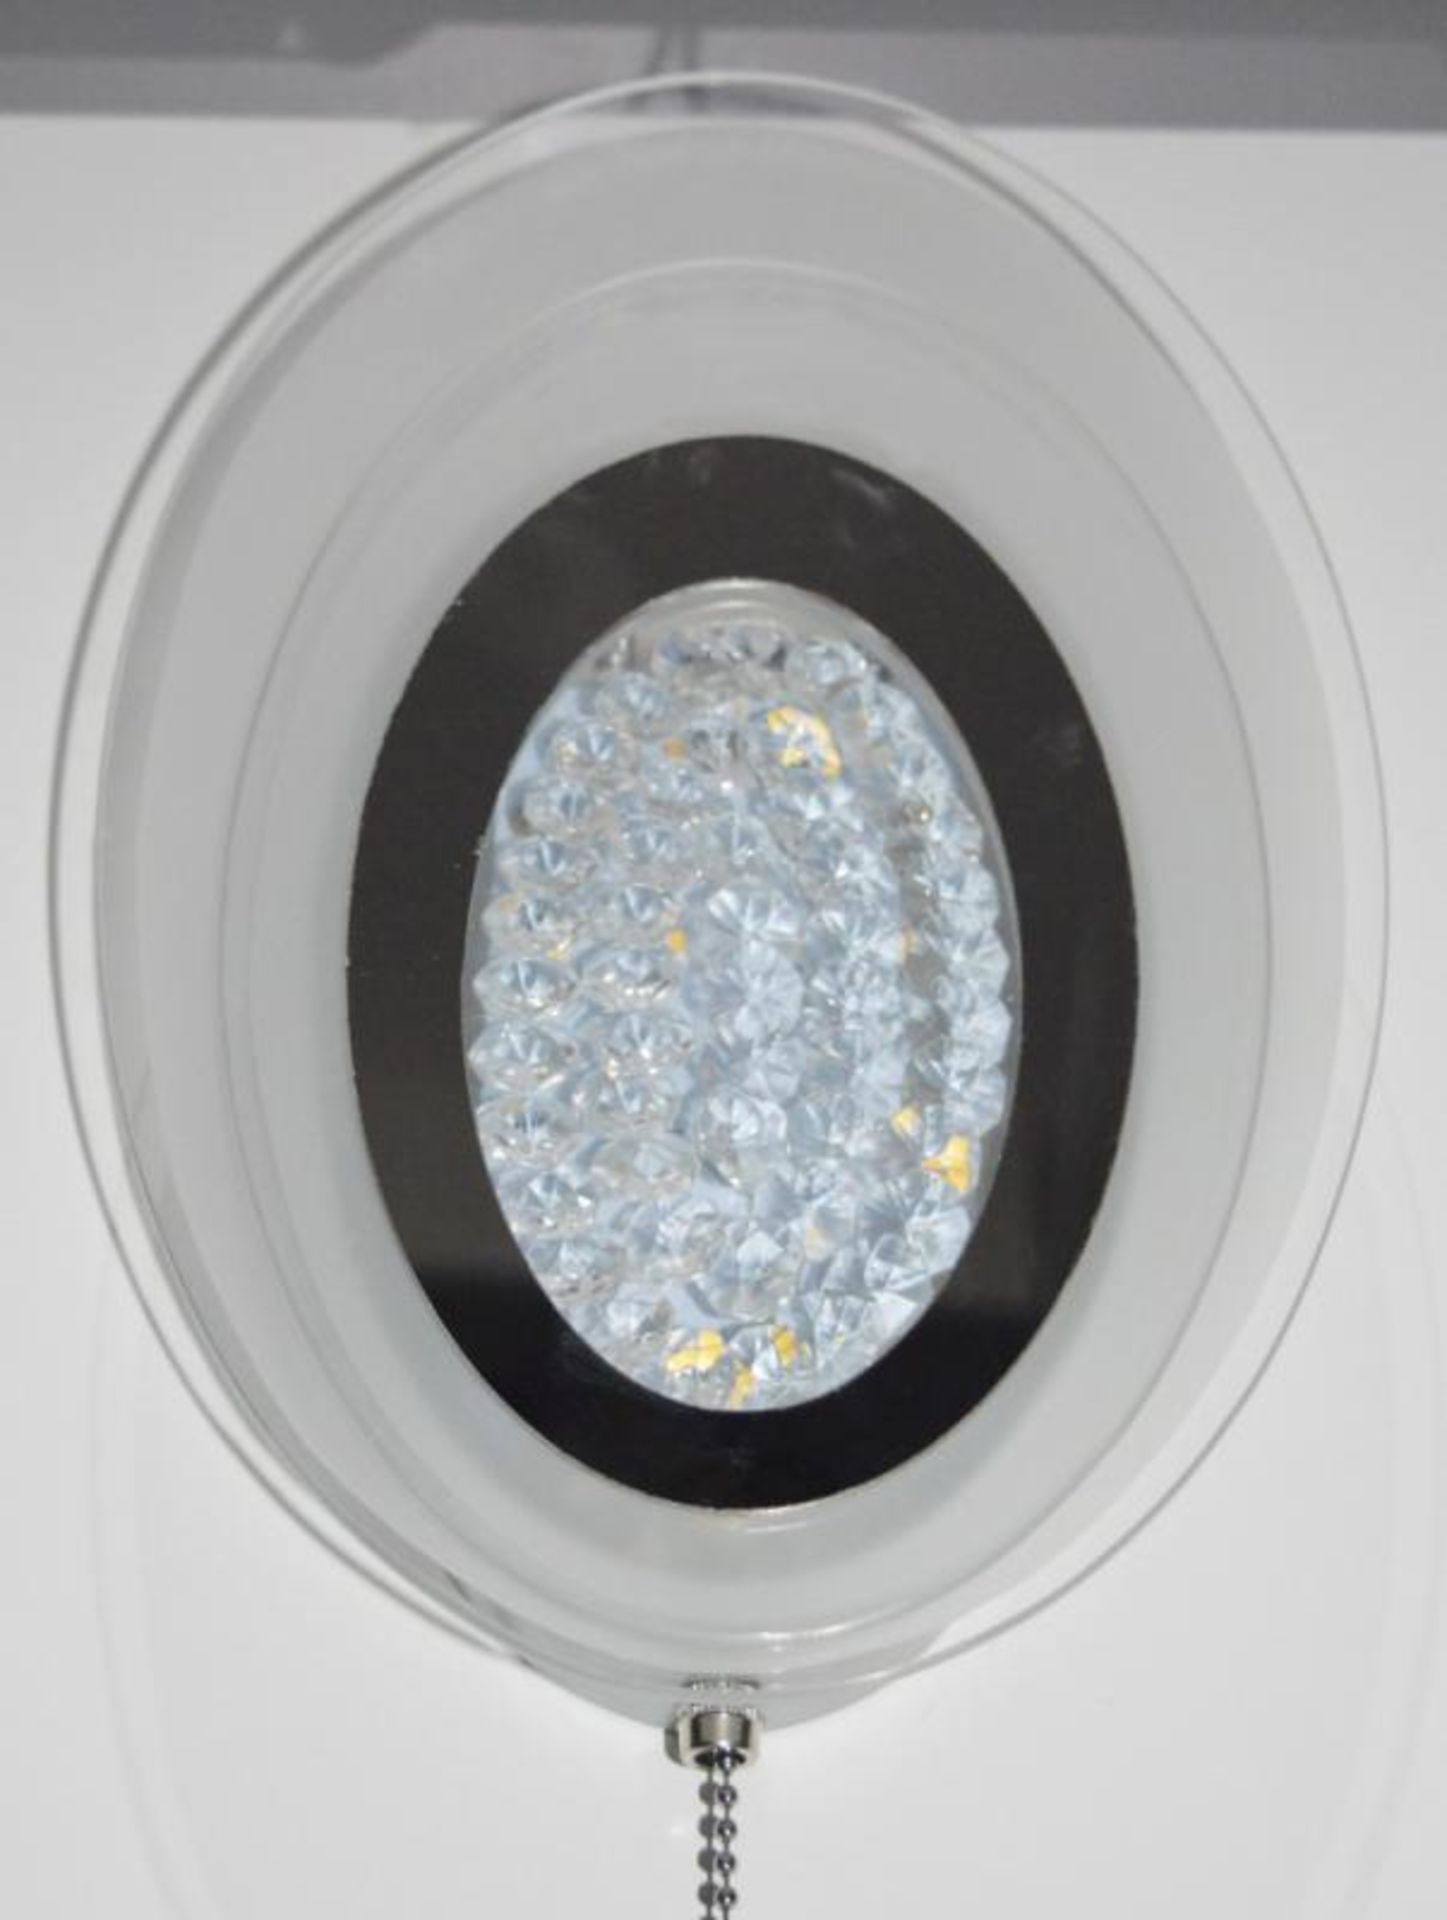 1 x LED Oval Chrome Wall Light With Frosted Glass - Ex Display Stock - CL298 - Ref J143 - Location: - Image 3 of 5